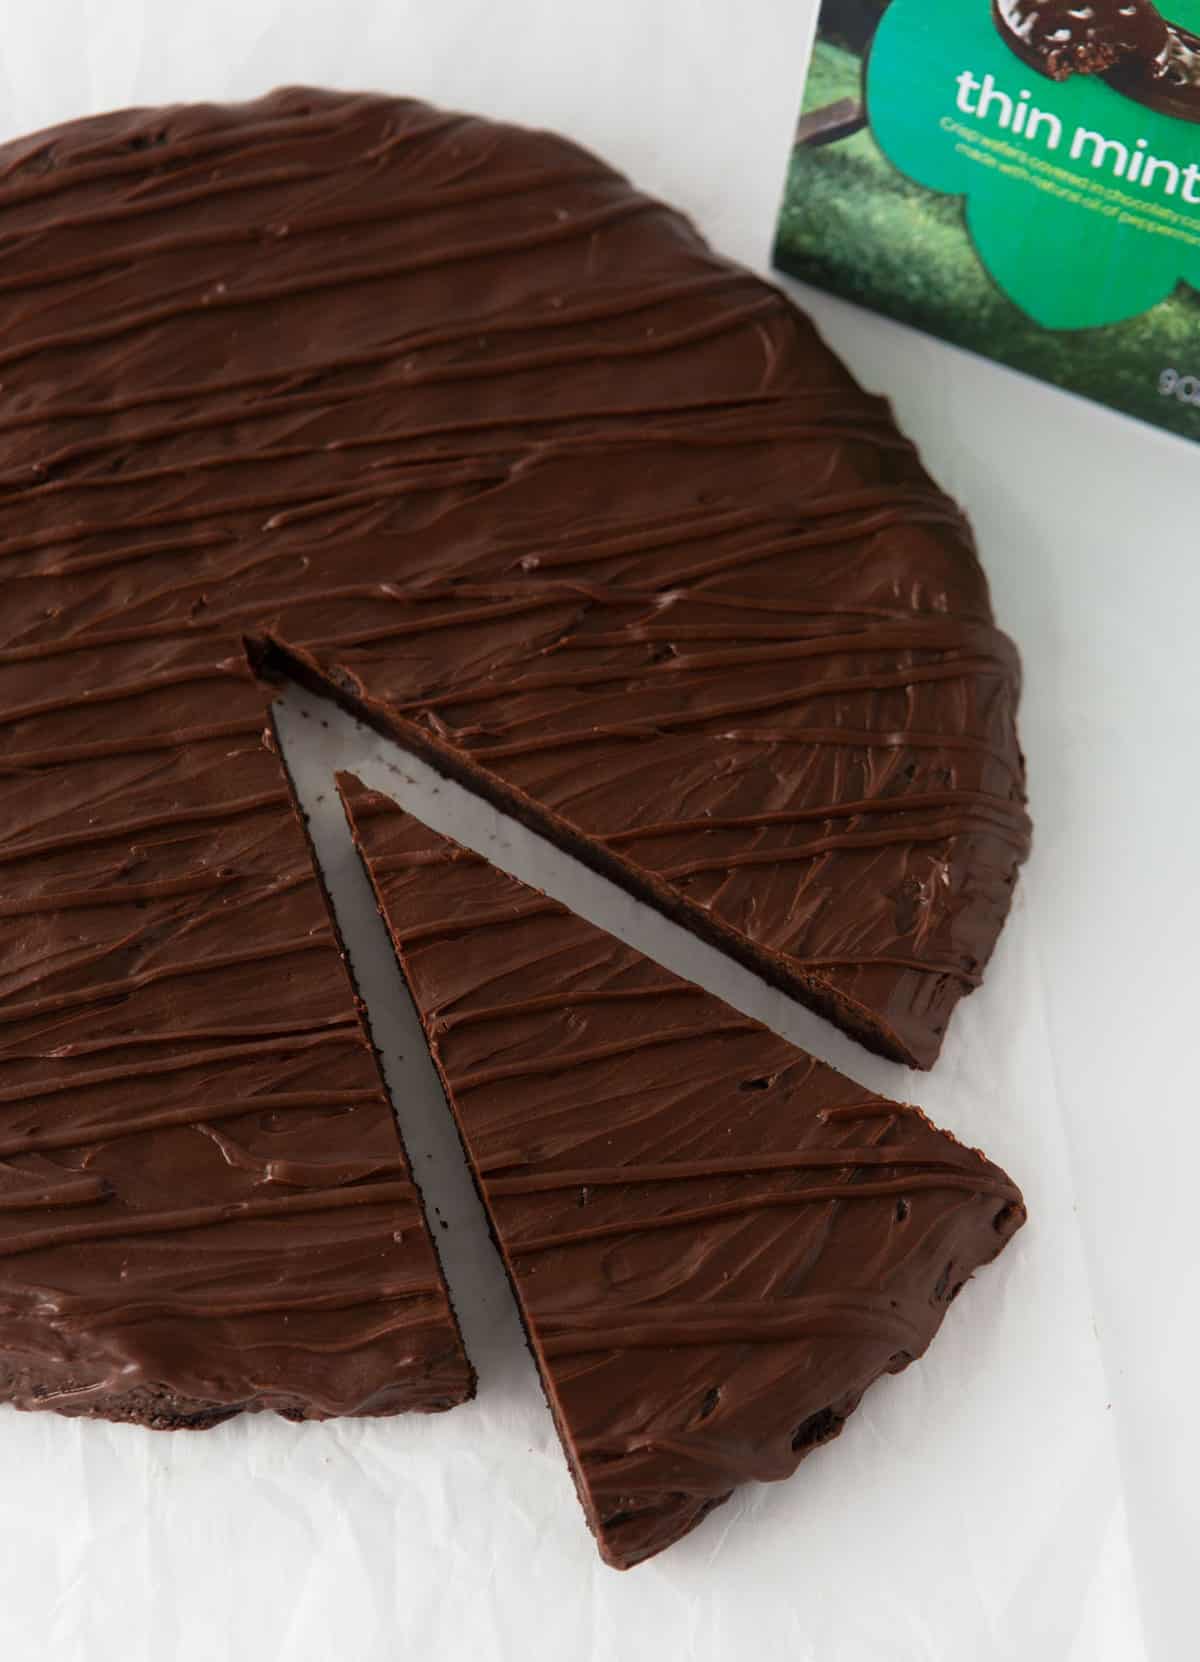 giant thin mint cookie cake